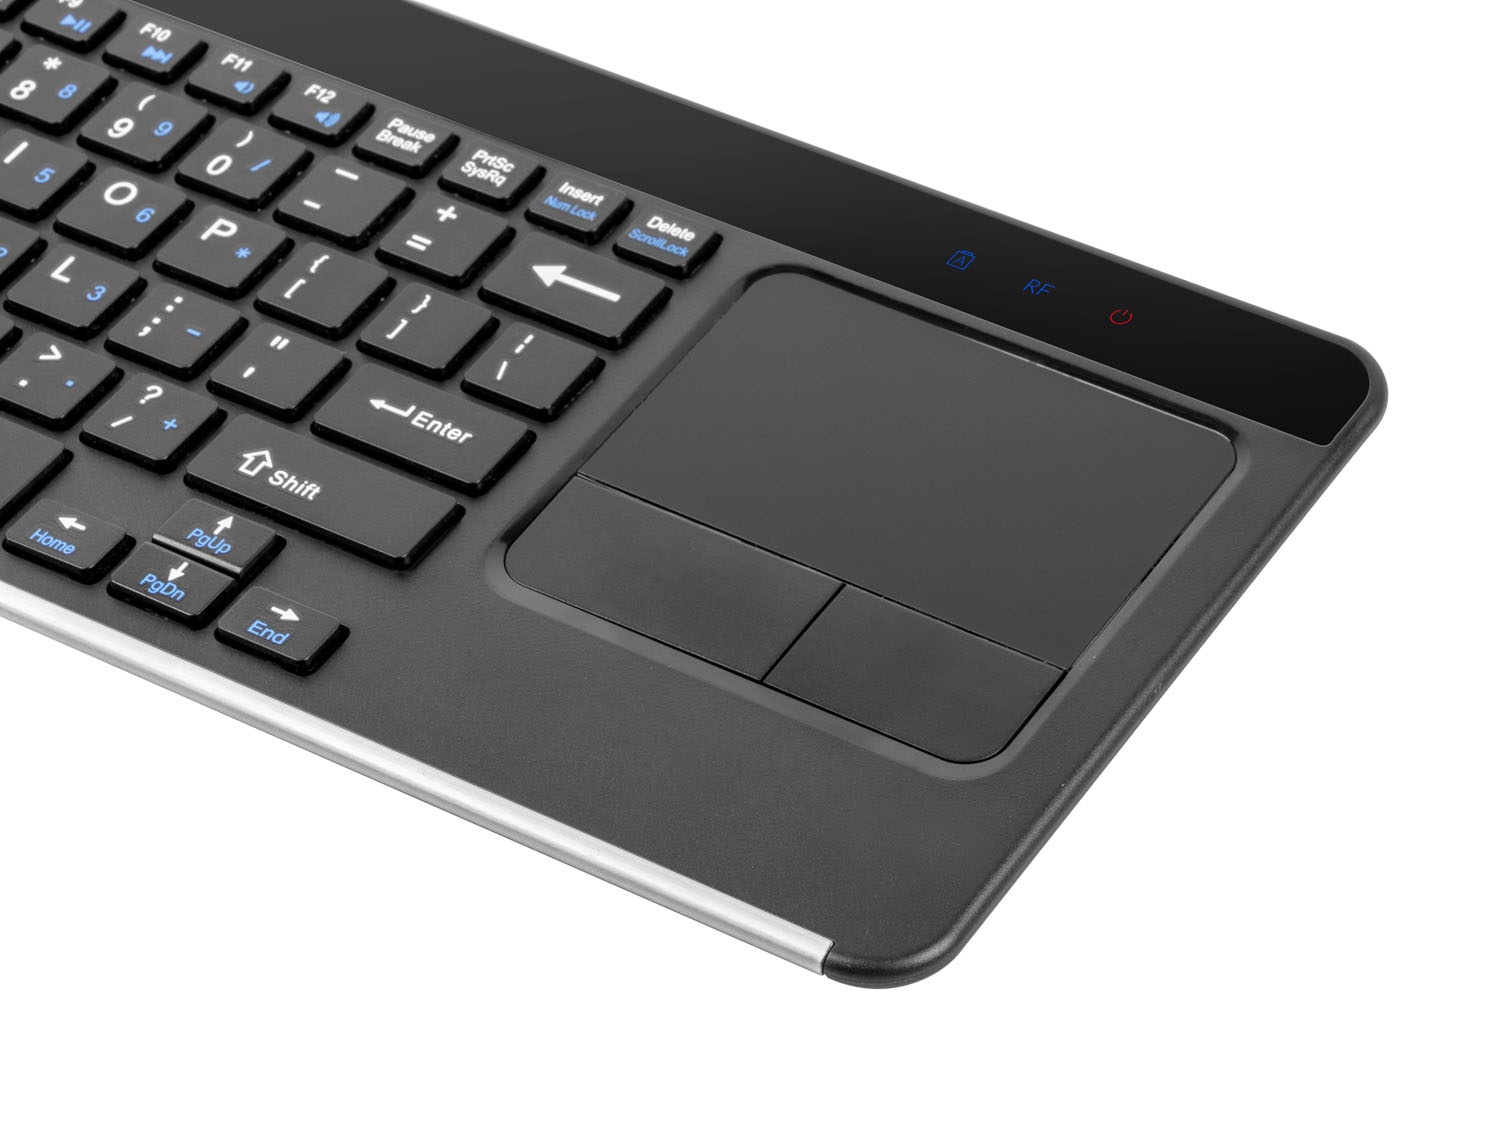 Touch pad. Wireless Keyboard with Touchpad. Клавиатура-тачпад беспроводная Prestigio click and Touch Wireless Keyboard. Natec clip.